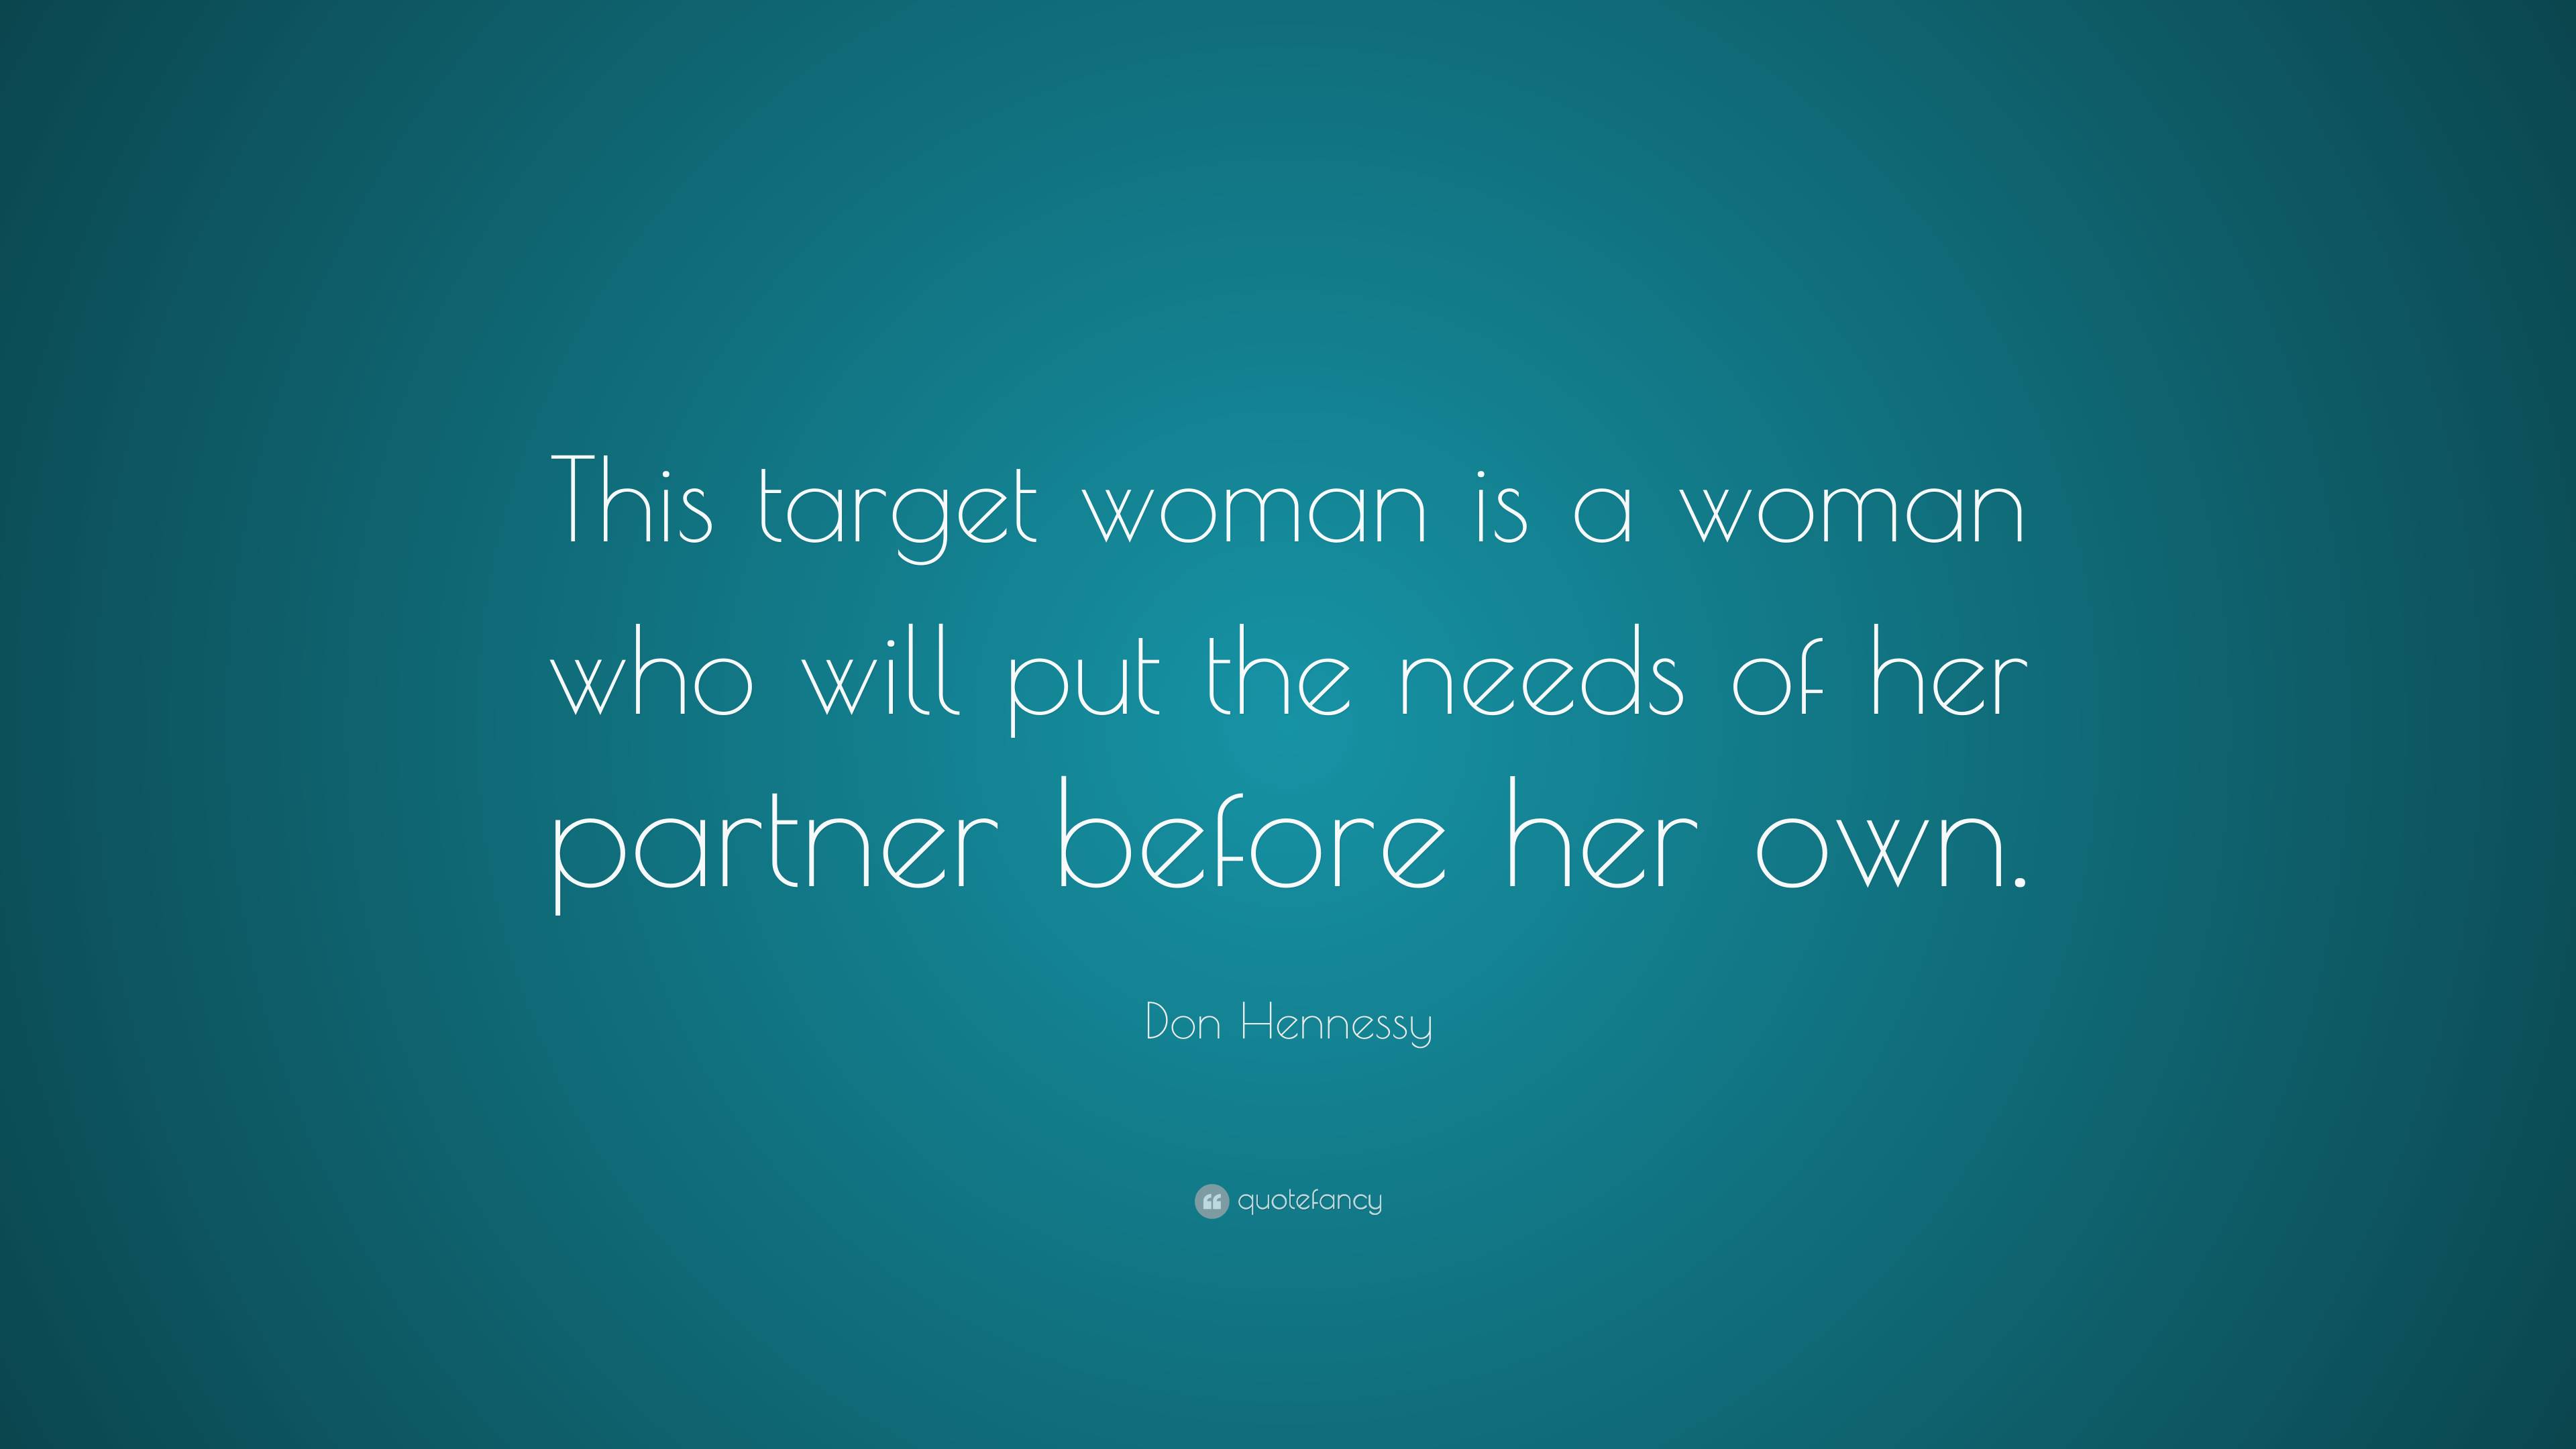 Don Hennessy Quote: “This target woman is a woman who will put the ...